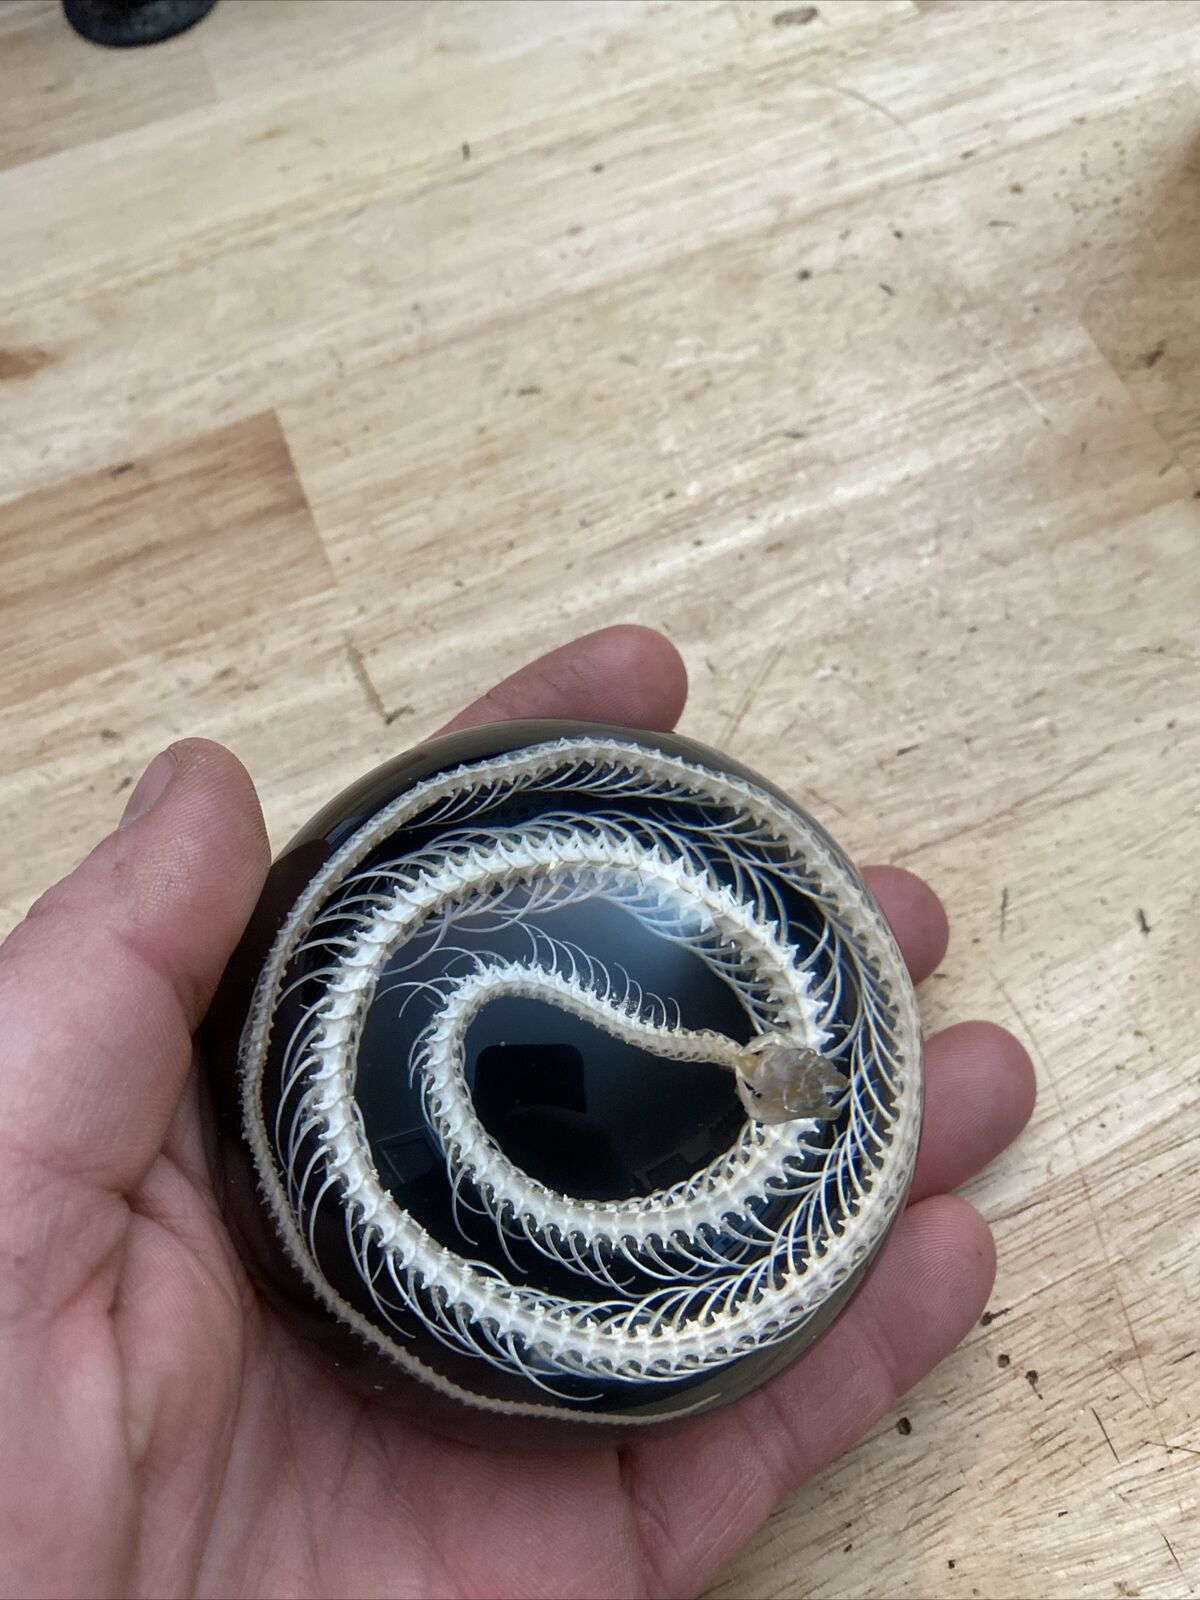 Snake Skeleton Paperweight Solid 1/2 LBS REAL TAXIDERMIST USA MADE UNIQUE GIFT